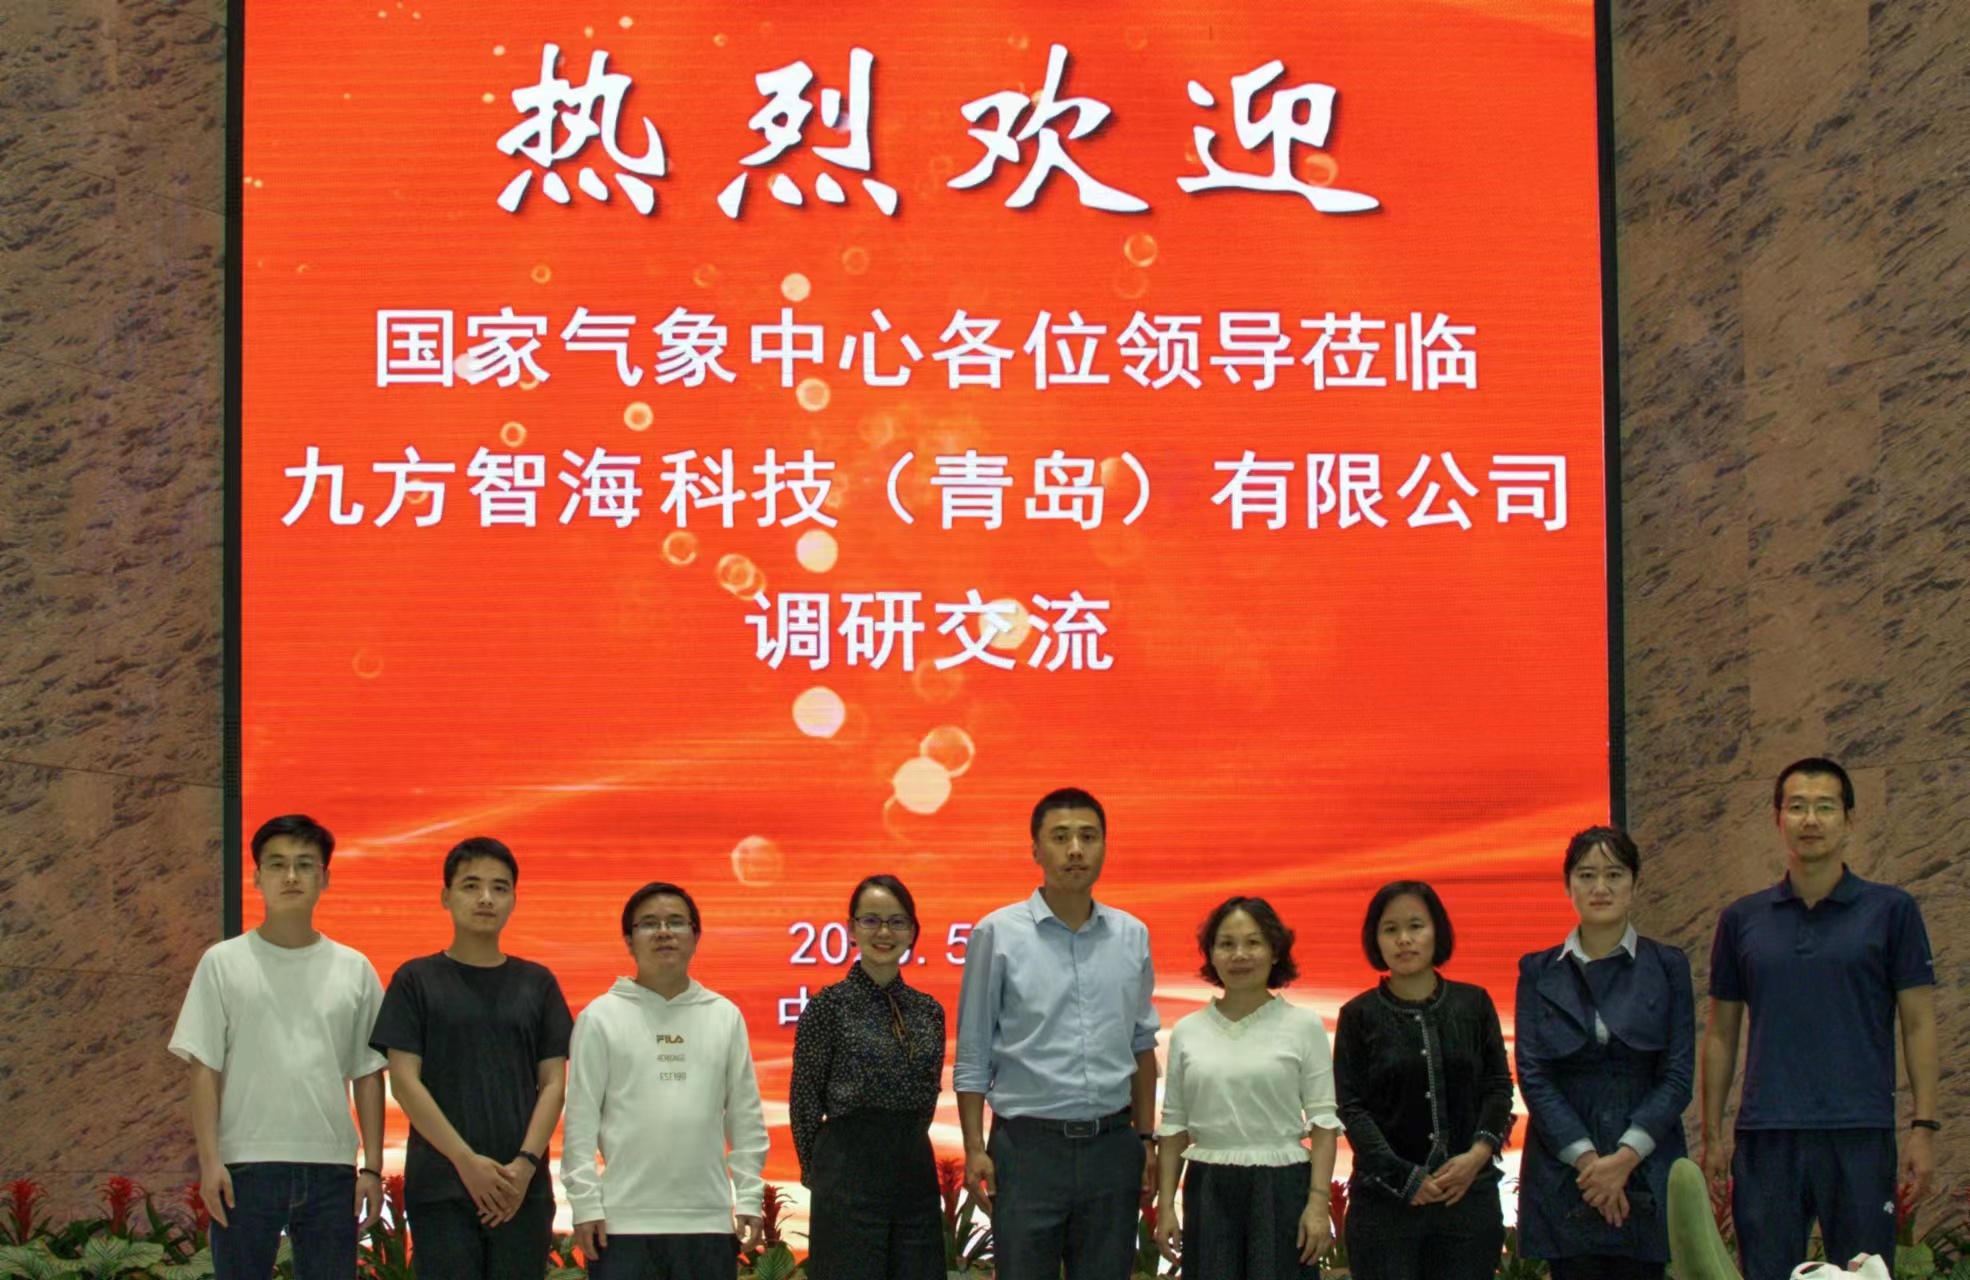 National Meteorological Center Visits Ninecosmos Zhuhai (Qingdao) Co., Ltd. for Research and Communication